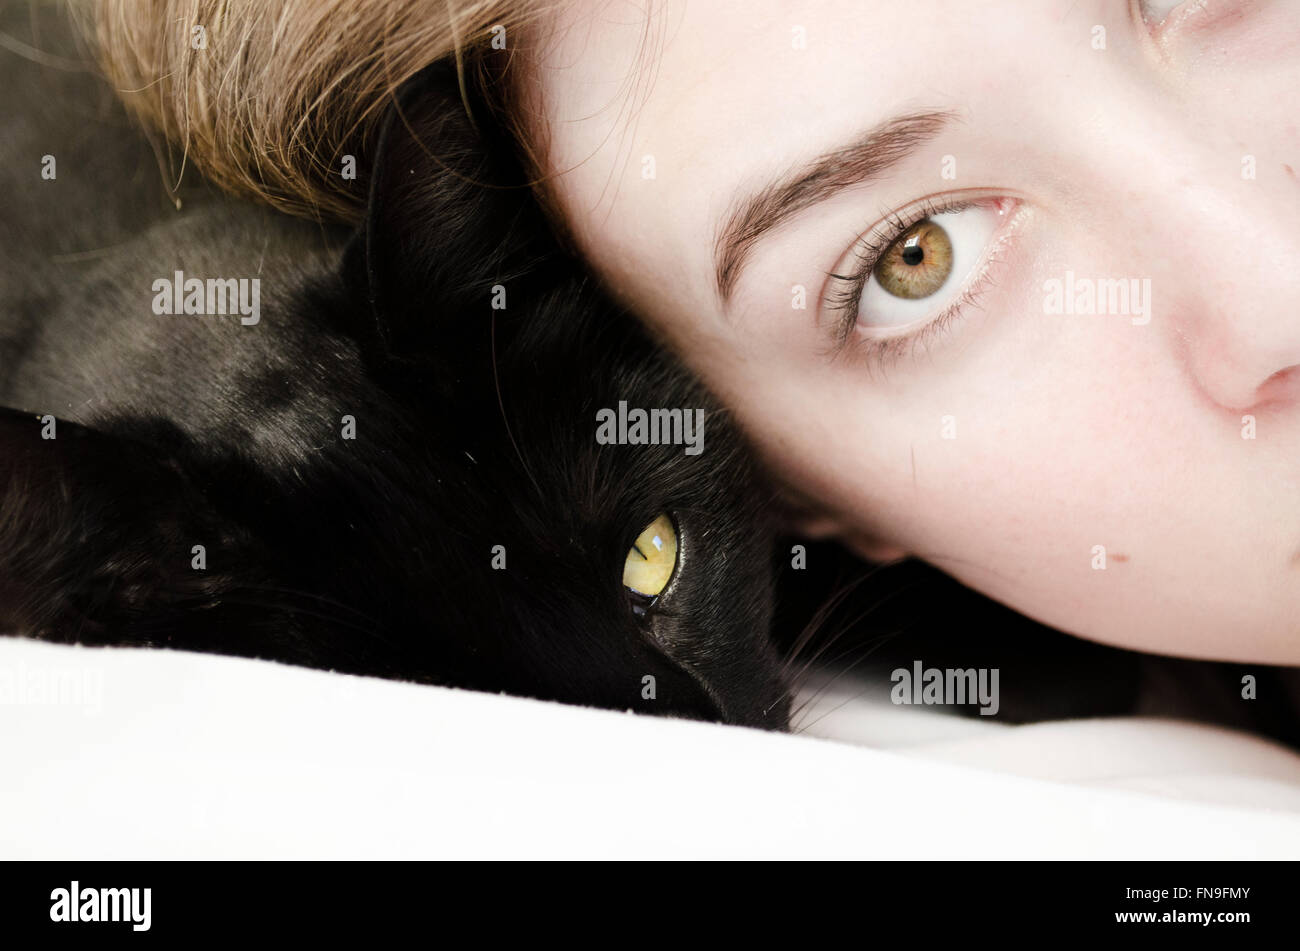 Portrait of a woman and cat lying next to each other Stock Photo